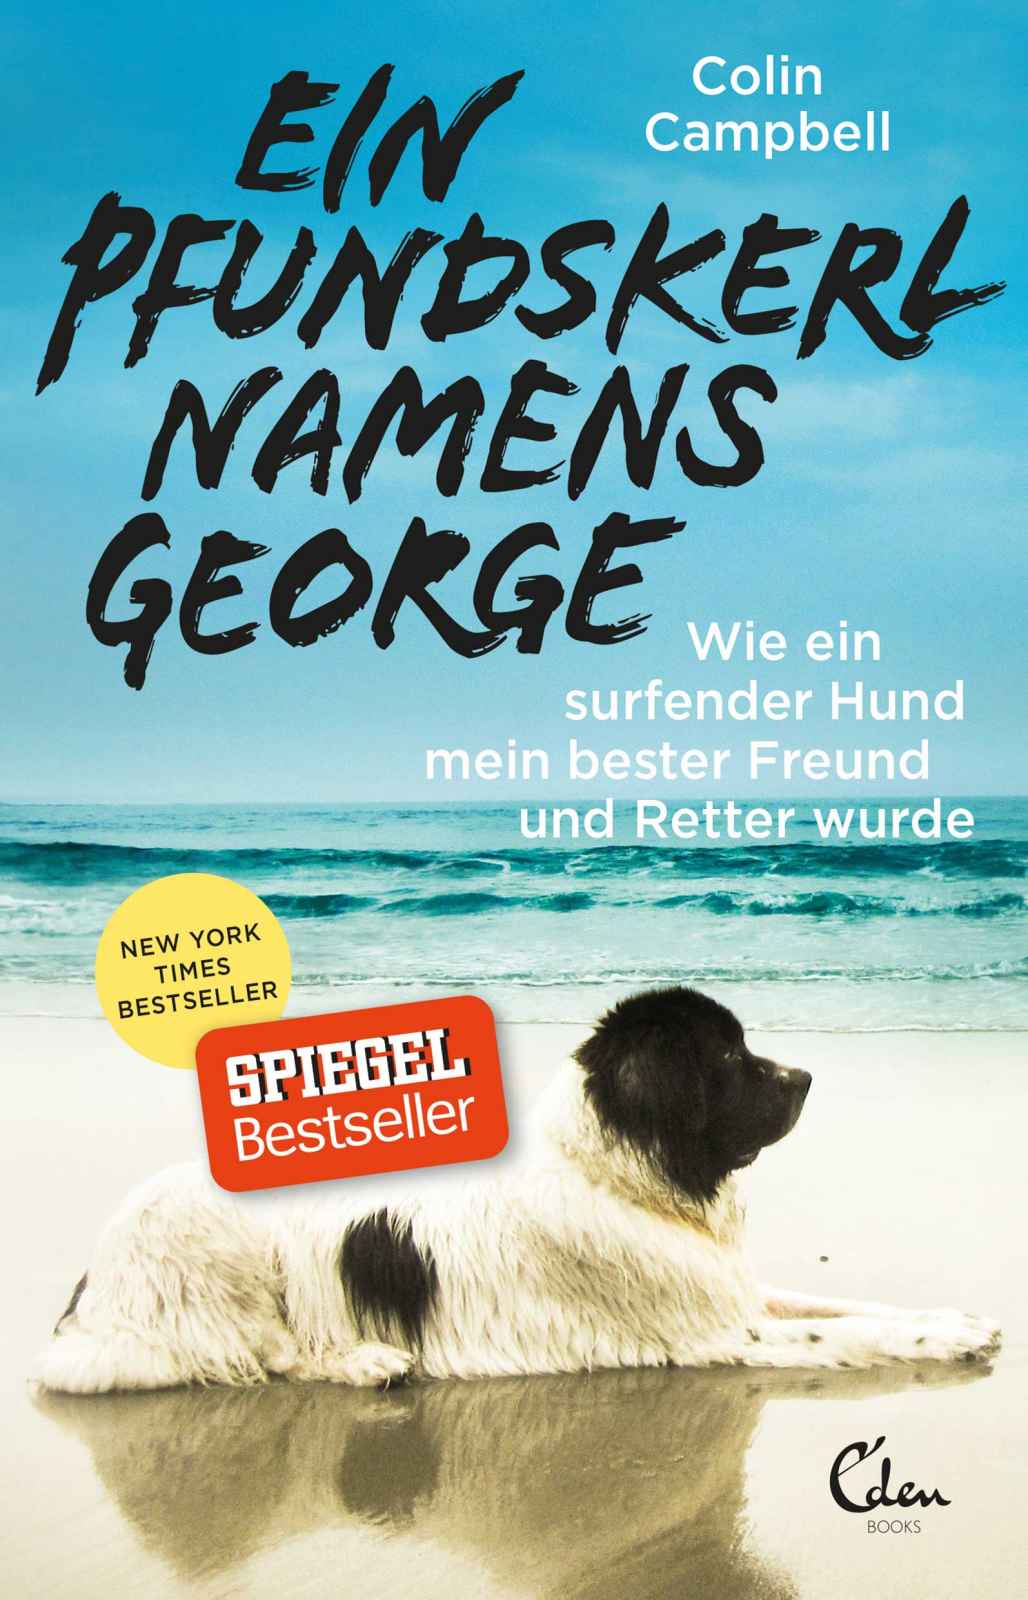 Buchcover: Colin Campbell: Ein Pfundskerl Namens George. Eden Books